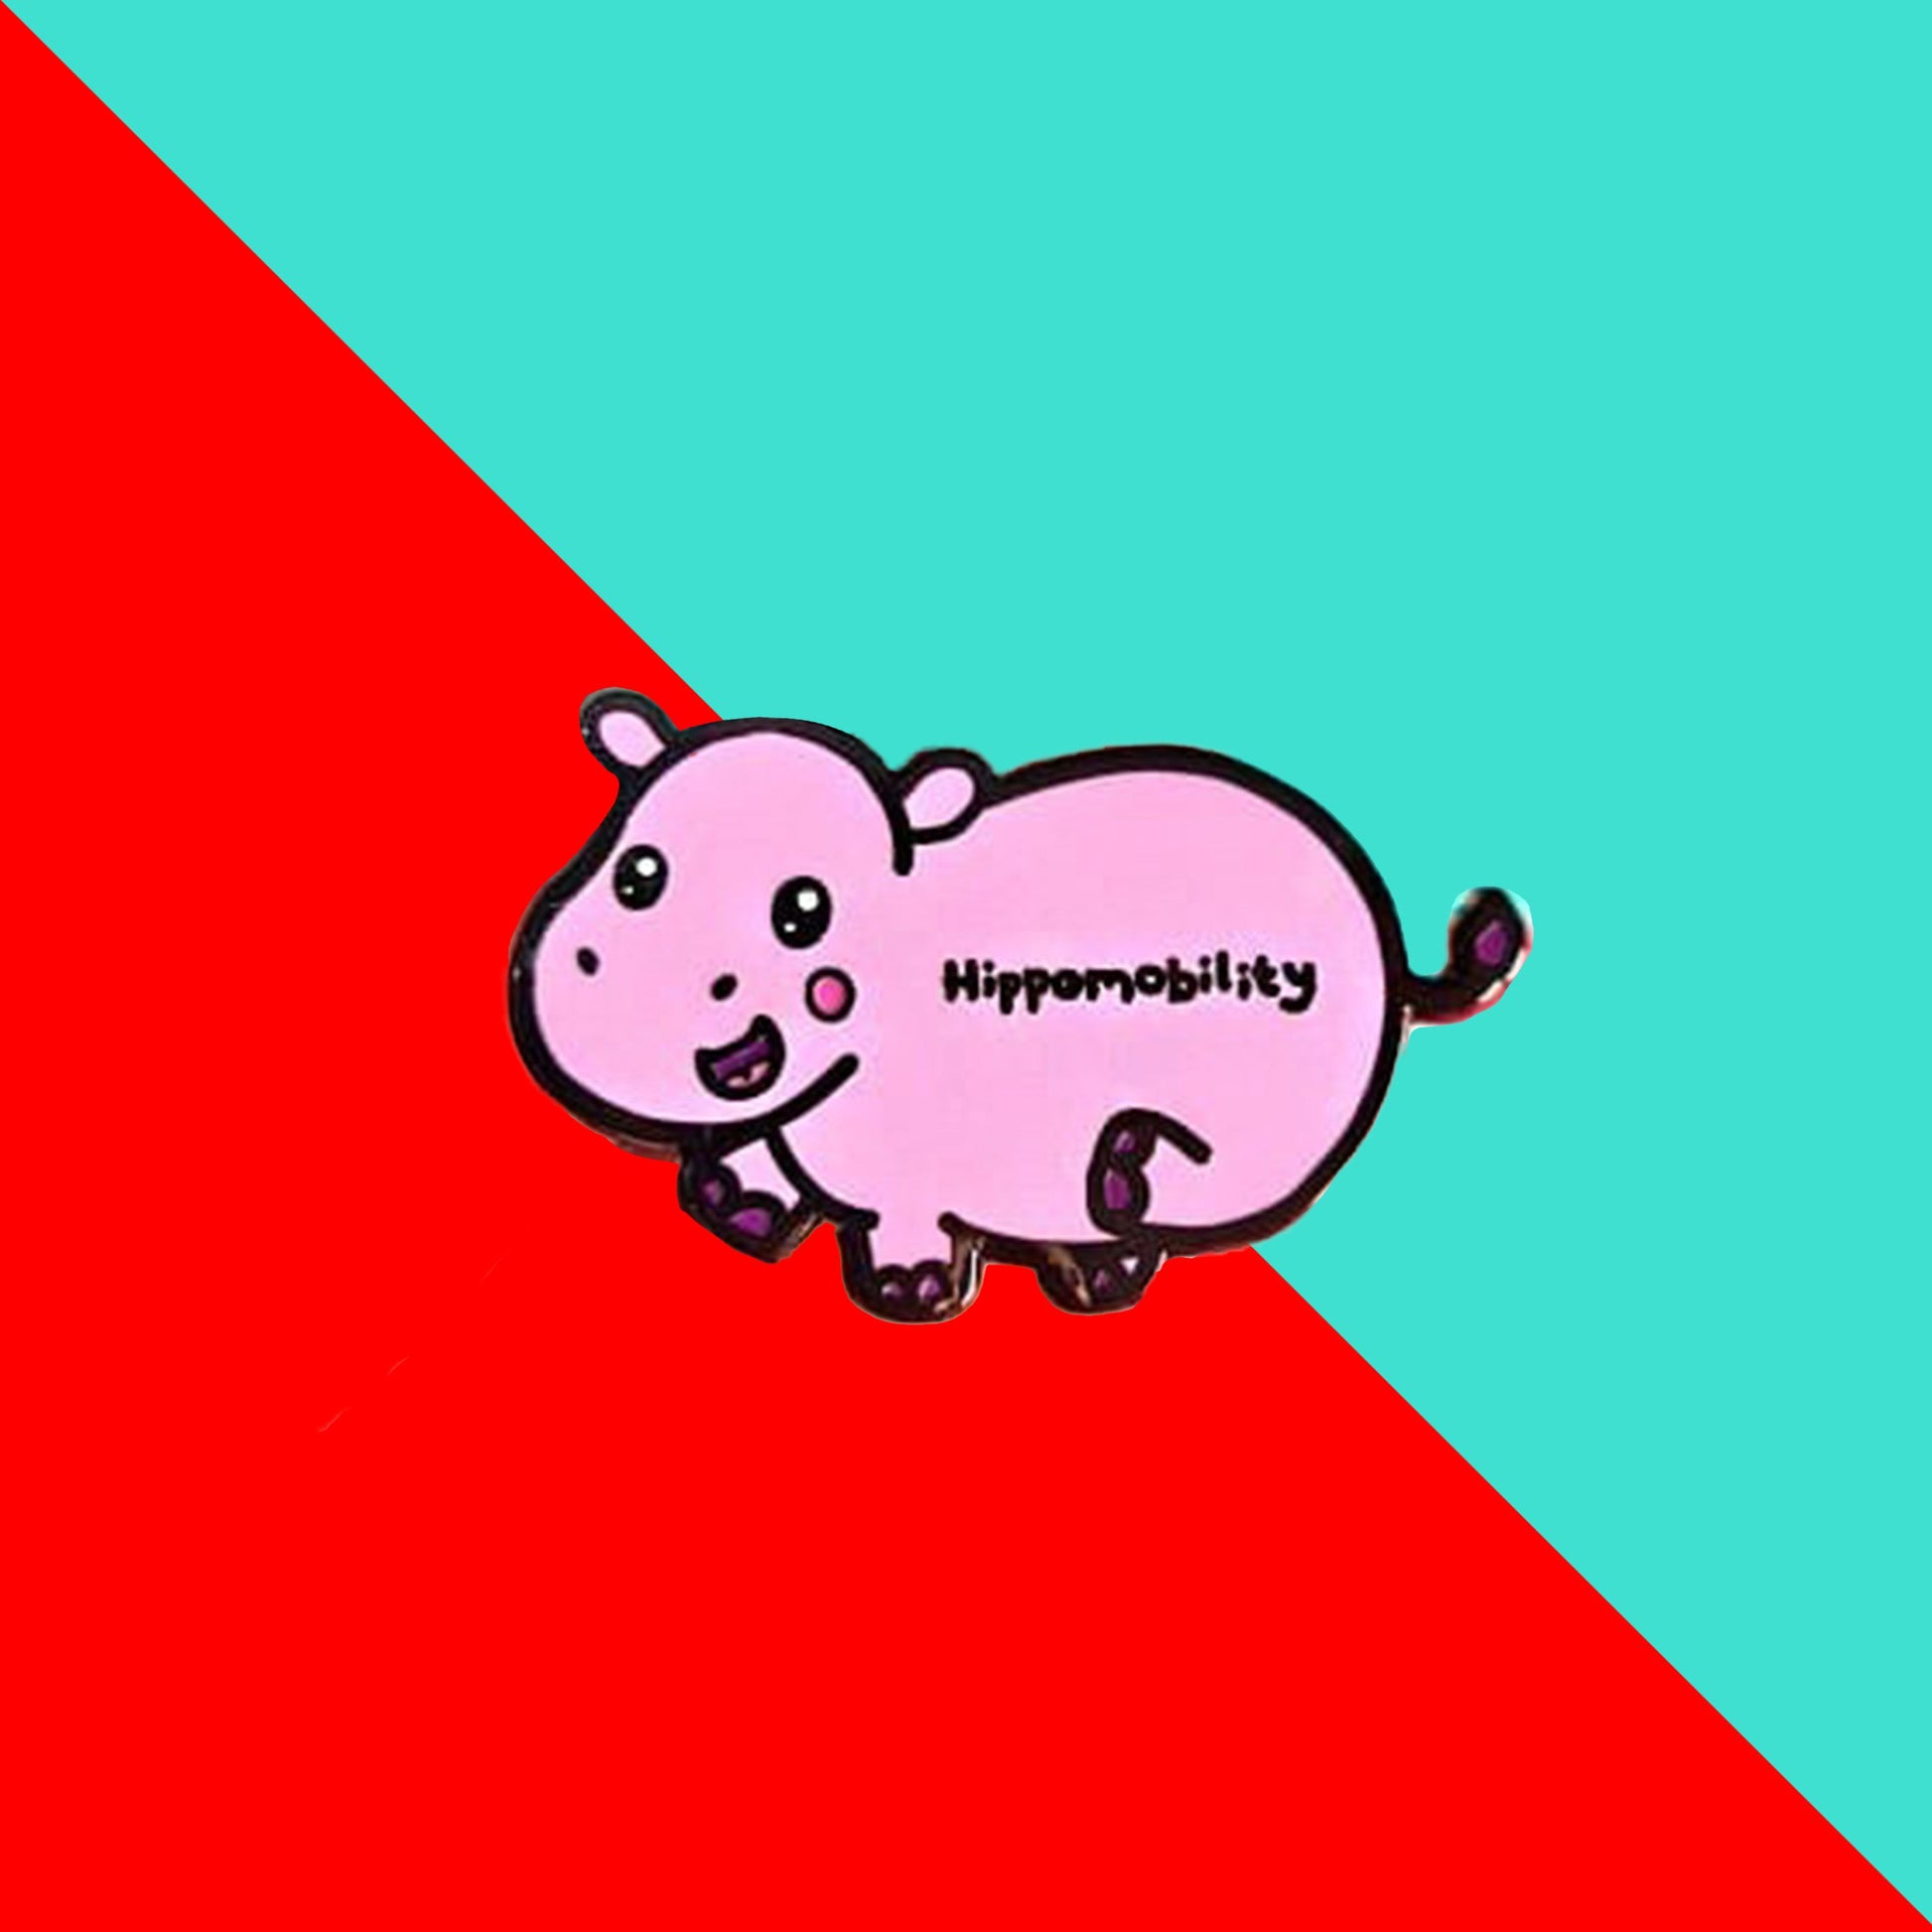 Hippmobility Enamel Pin - Hyper Mobility shown on a red and blue background. The enamel pin is of a pink happy hippo with the text hippomobility written on its stomach. The enamel pin is designed to raise awareness for hyper mobility